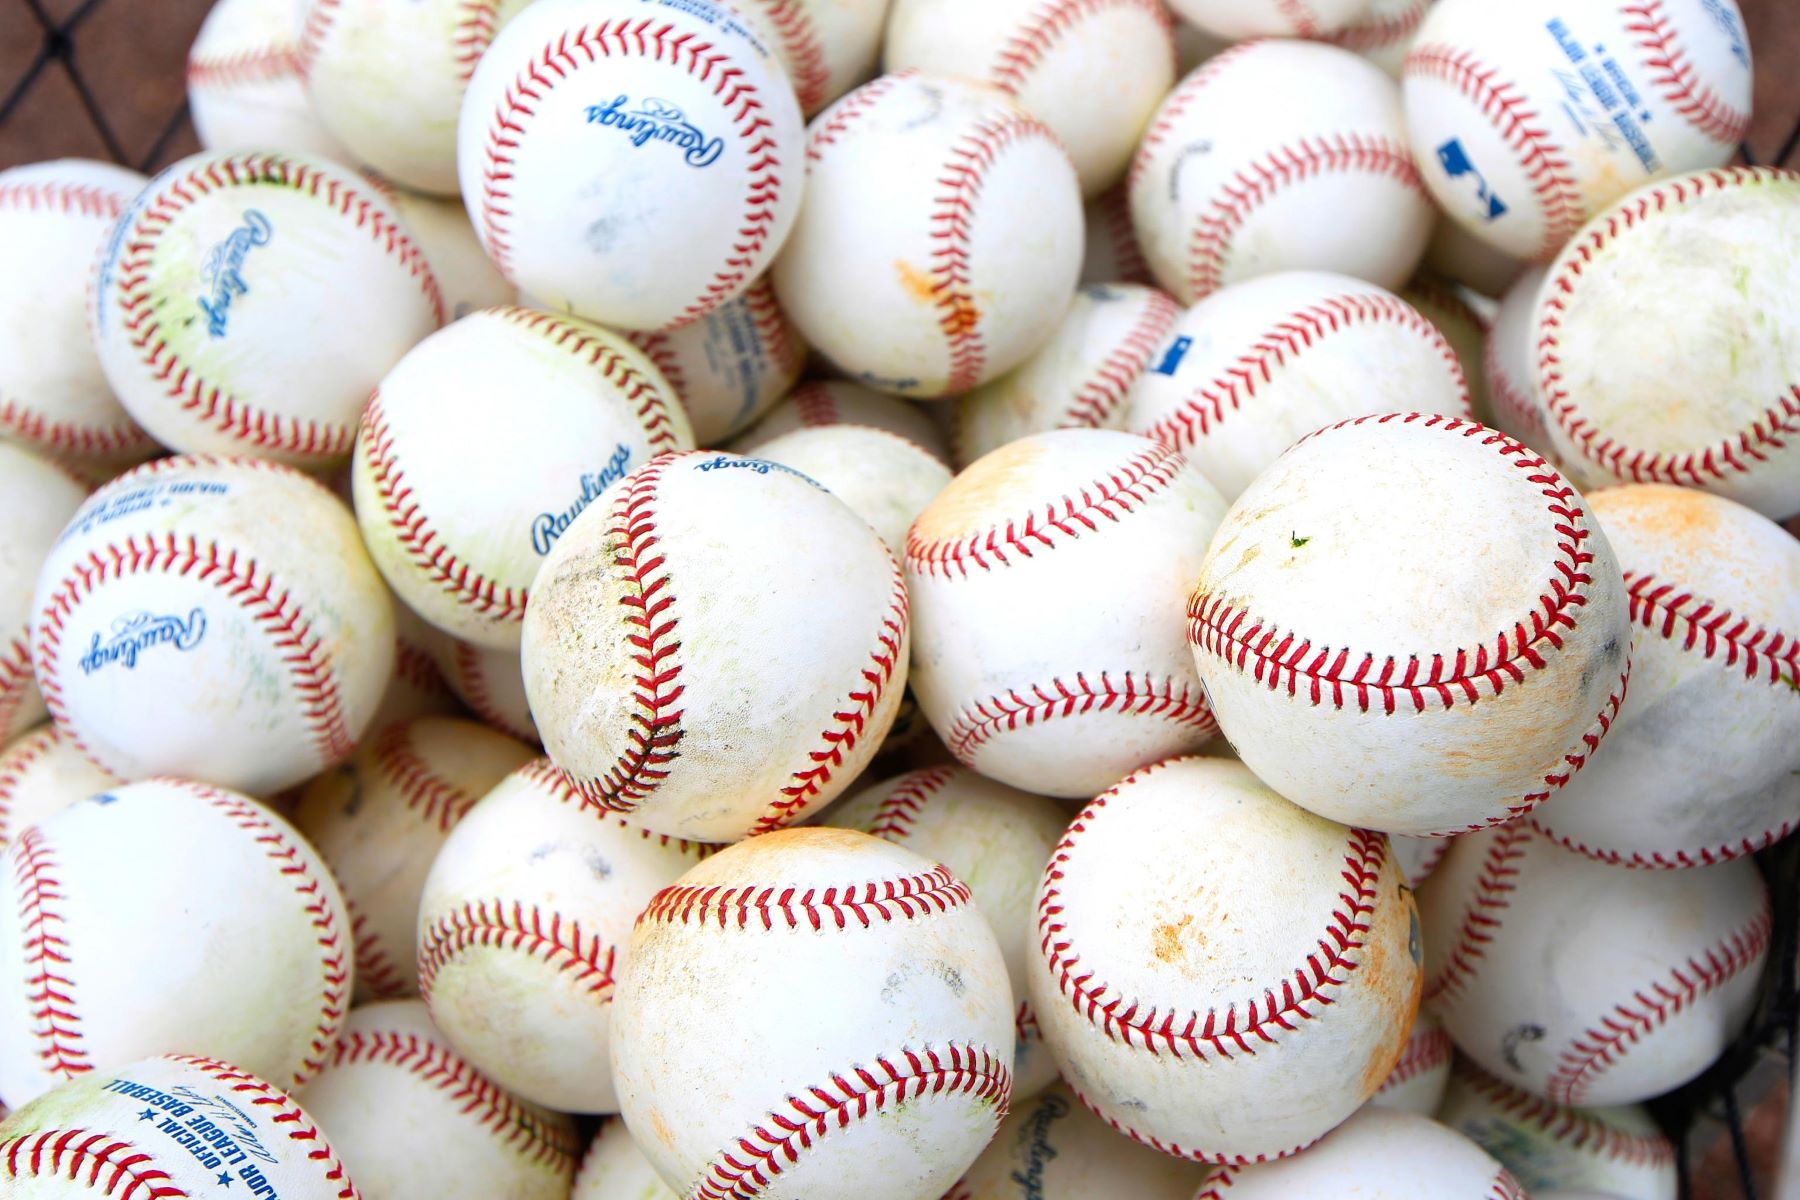 The Surprising Reason Behind The Massive Number Of Games In A Baseball Season!